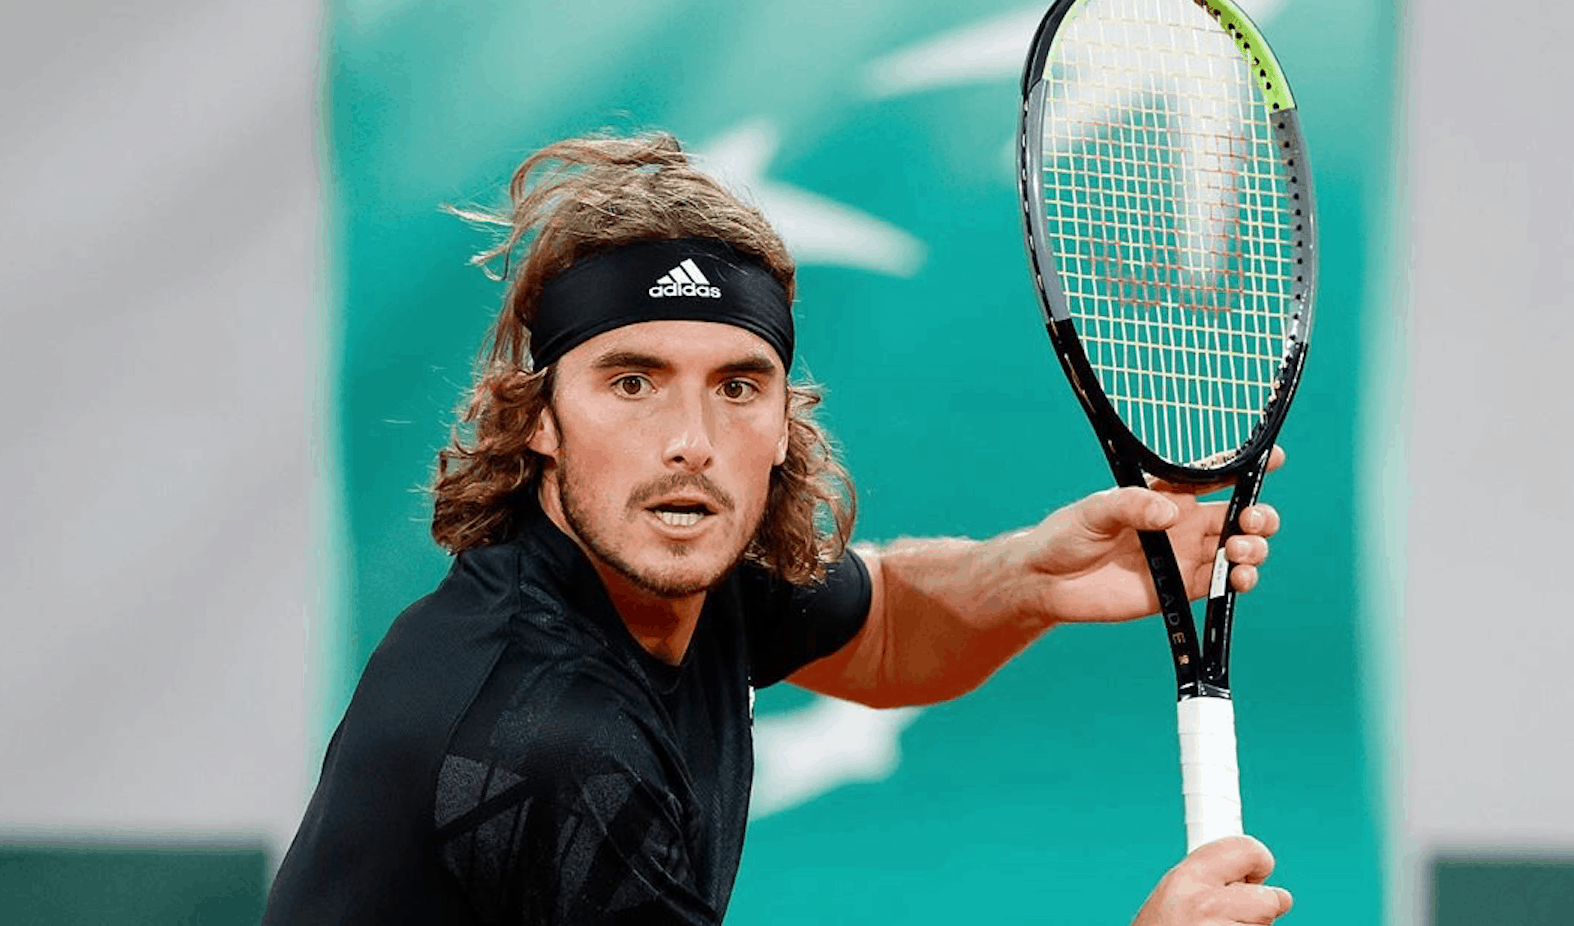 Stefanos Tsitsipas into his 1st French Open semifinal